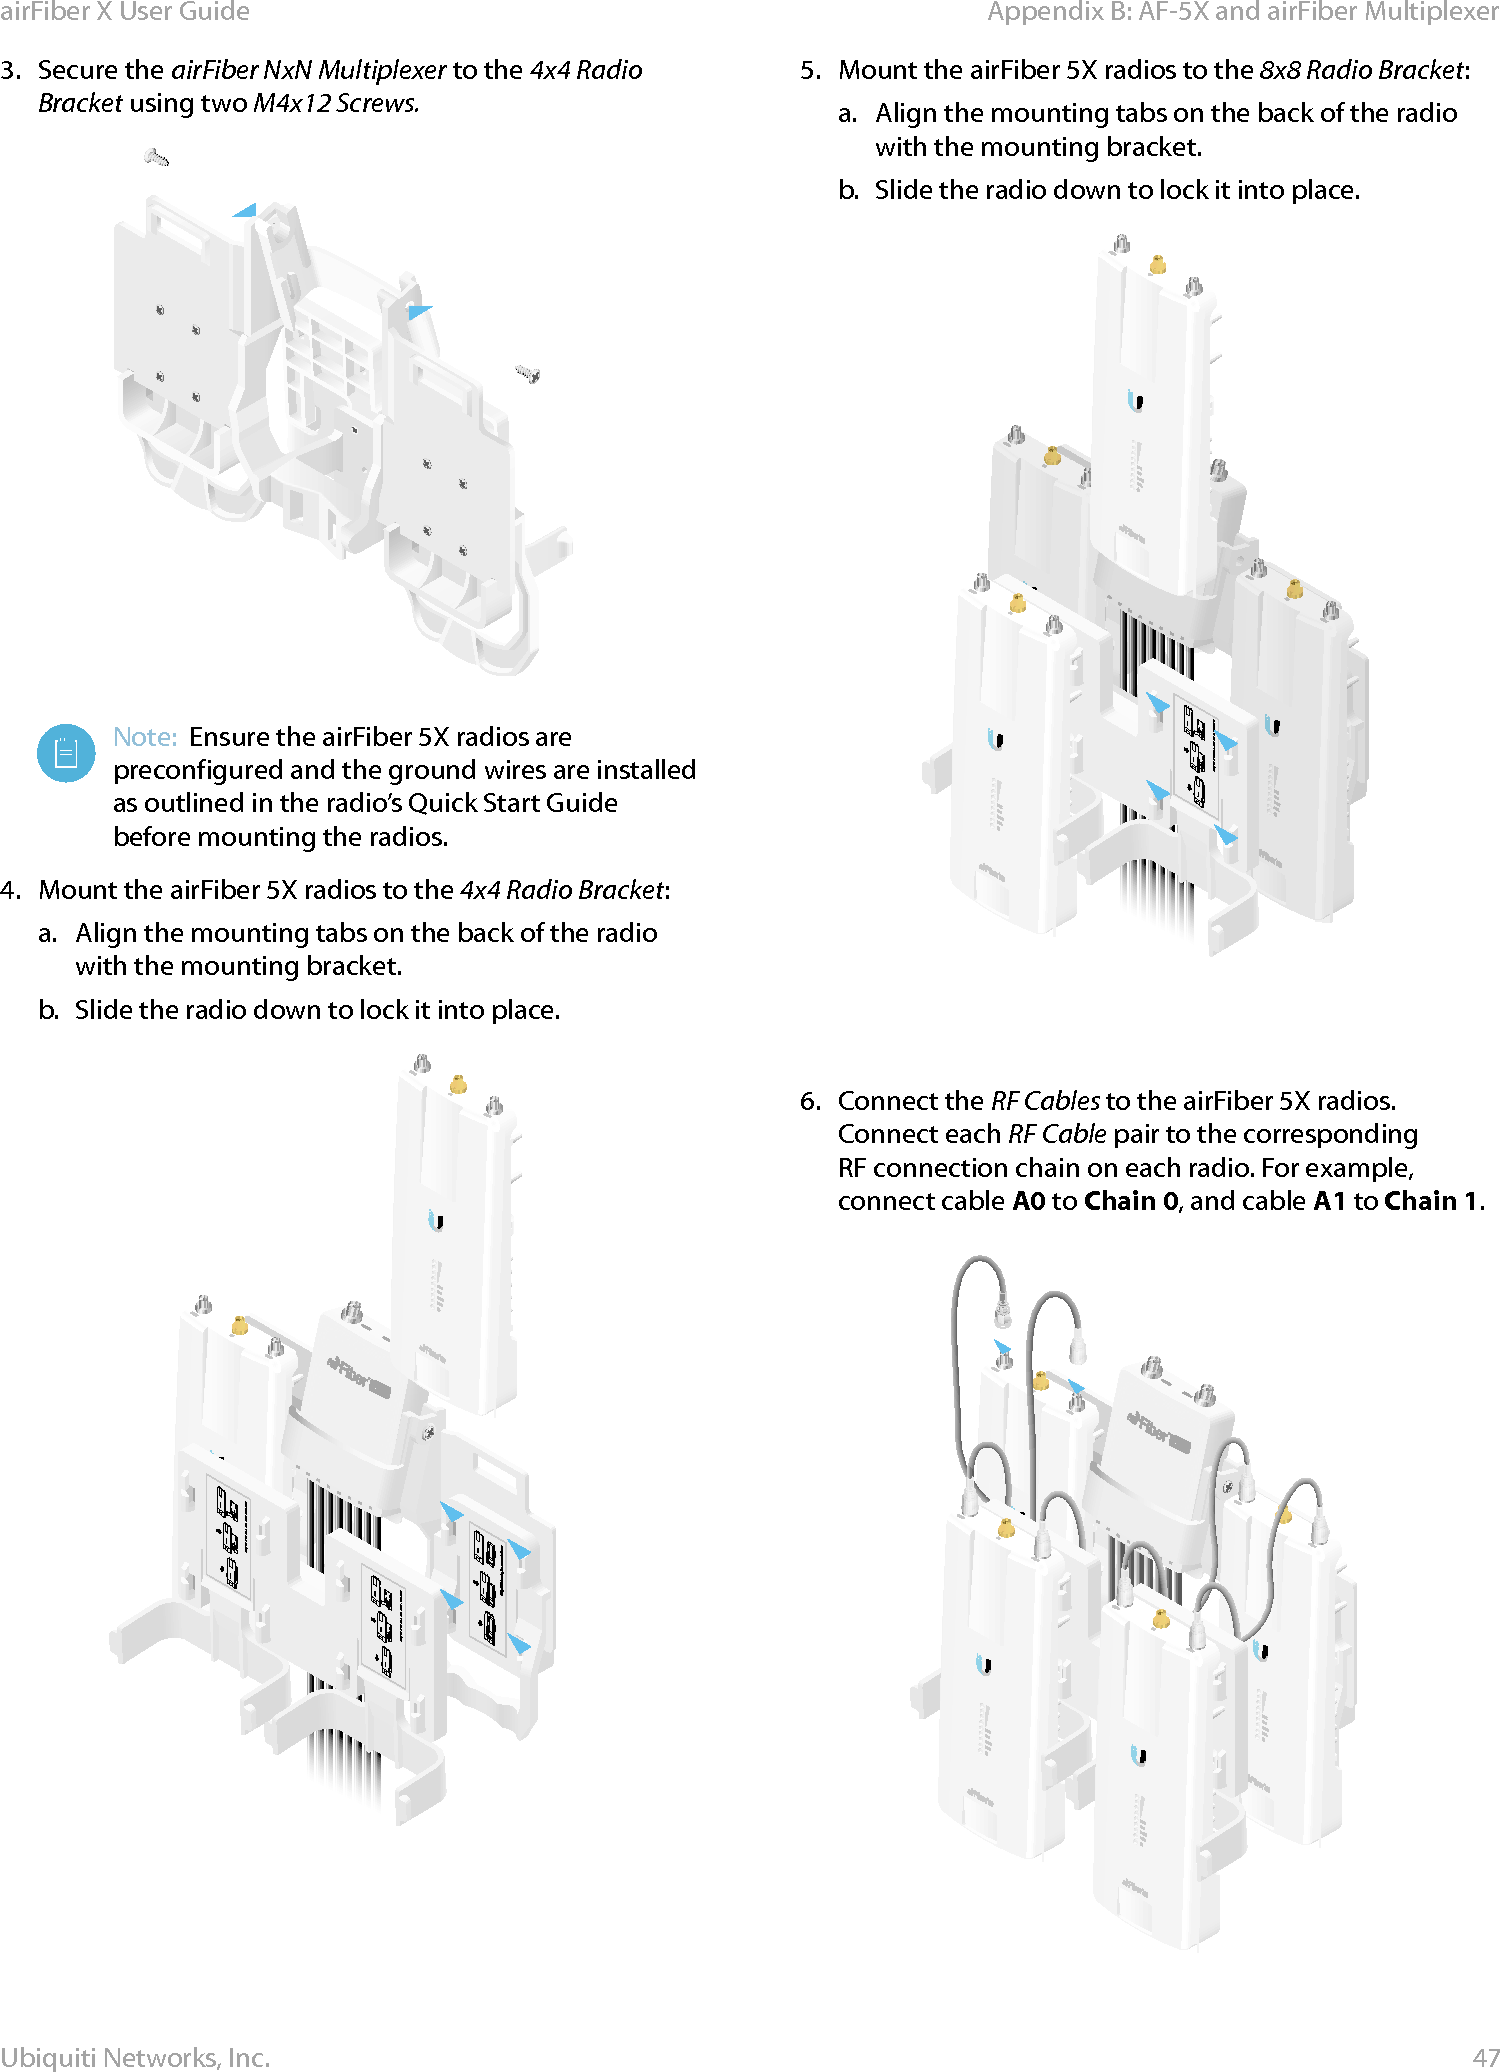 47Appendix B: AF-5X and airFiber MultiplexerairFiber X User GuideUbiquiti Networks, Inc.3.  Secure the airFiber NxN Multiplexer to the 4x4 Radio Bracket using two M4x12 Screws.Note:  Ensure the airFiber 5X radios are preconfigured and the ground wires are installed as outlined in the radio’s Quick Start Guide before mounting the radios.4.  Mount the airFiber 5X radios to the 4x4 Radio Bracket:a.  Align the mounting tabs on the back of the radio with the mounting bracket.b.  Slide the radio down to lock it into place.Ubiquiti Networks, Inc. www.ubnt.comUbiquiti Networks, Inc. www.ubnt.com5.  Mount the airFiber 5X radios to the 8x8 Radio Bracket:a.  Align the mounting tabs on the back of the radio with the mounting bracket.b.  Slide the radio down to lock it into place.Ubiquiti Networks, Inc. www.ubnt.comUbiquiti Networks, Inc. www.ubnt.com6.  Connect the RF Cables to the airFiber 5X radios. Connect each RF Cable pair to the corresponding RFconnection chain on each radio. For example, connect cable A0 to Chain 0, and cable A1 to Chain 1.